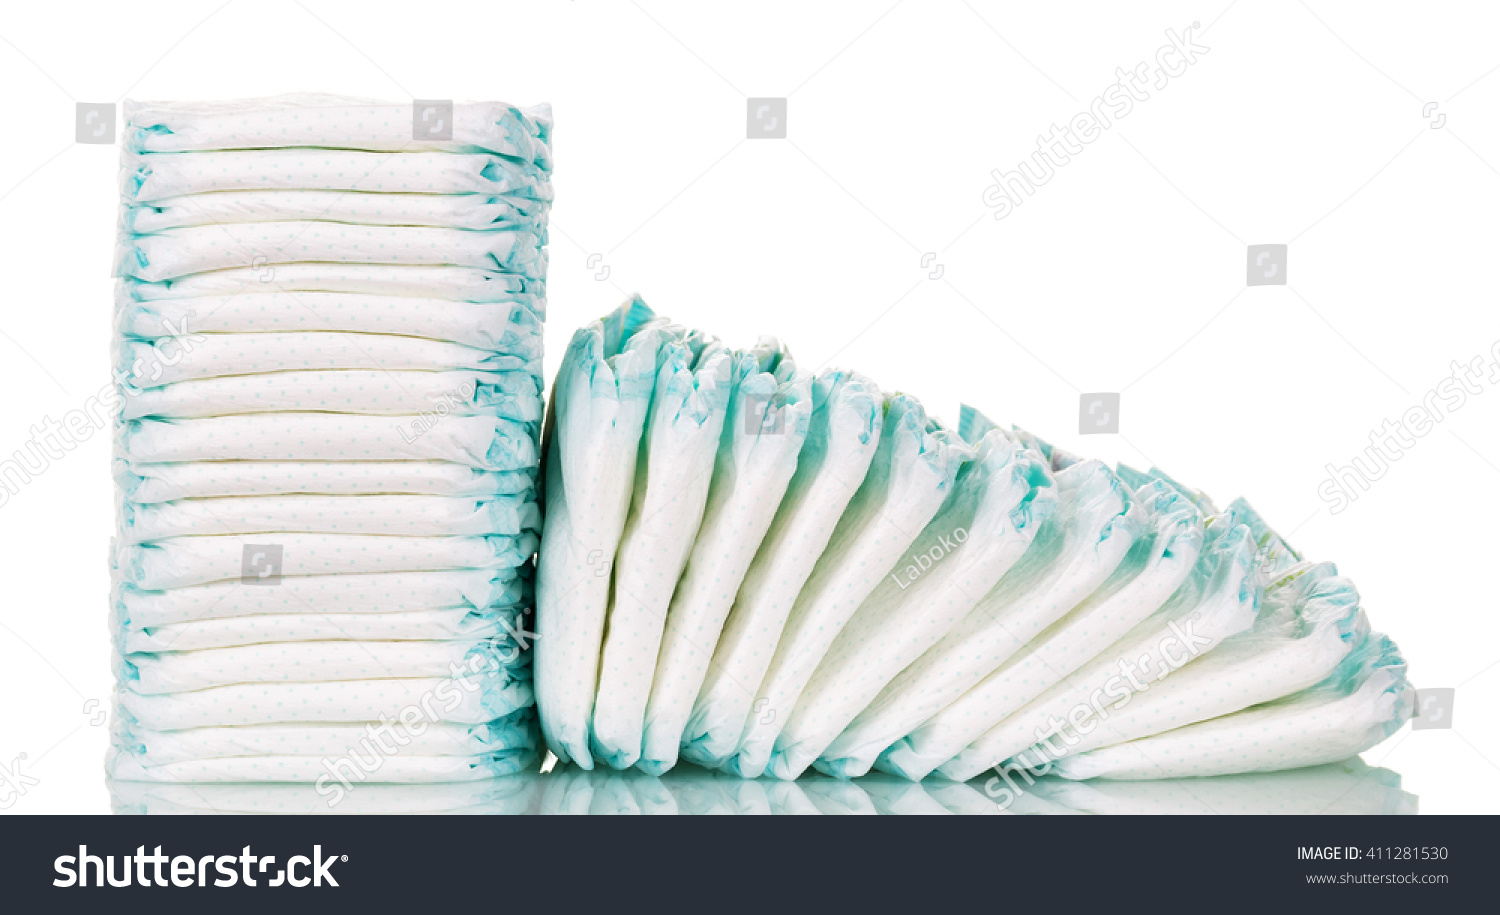 Stacks of diapers for children isolated on white background. #411281530